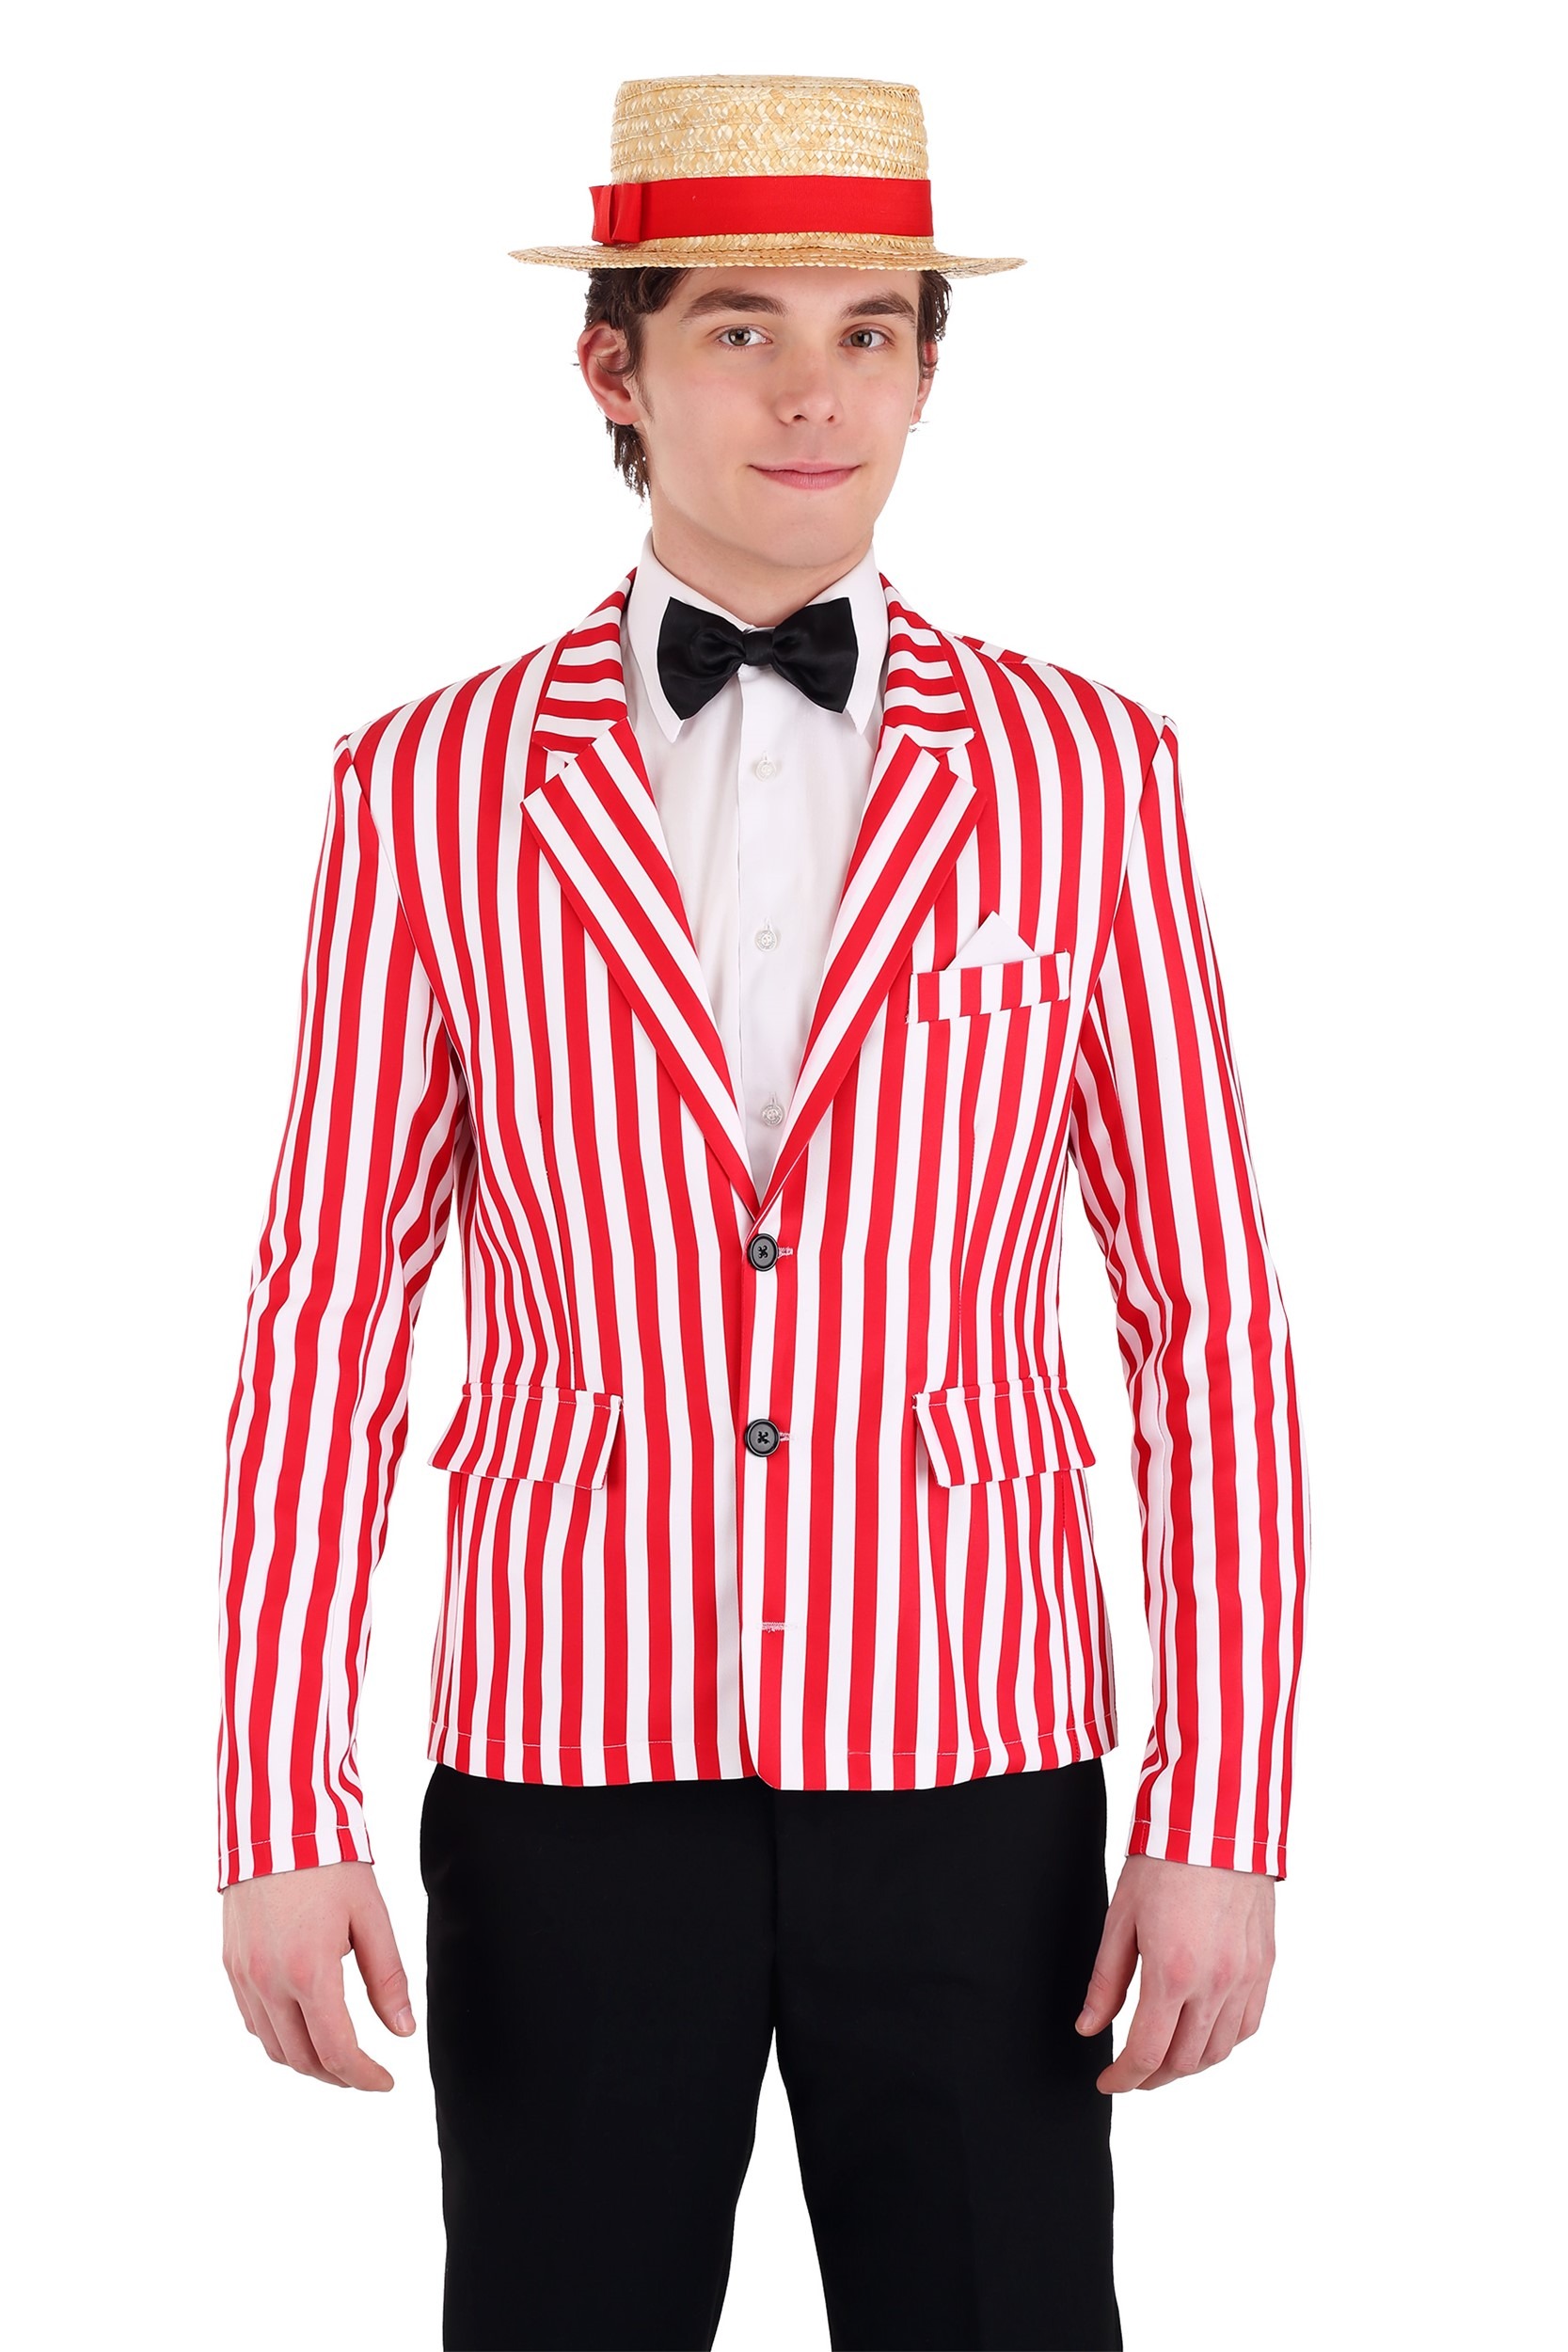 Candy Striped Jacket Mens Costume